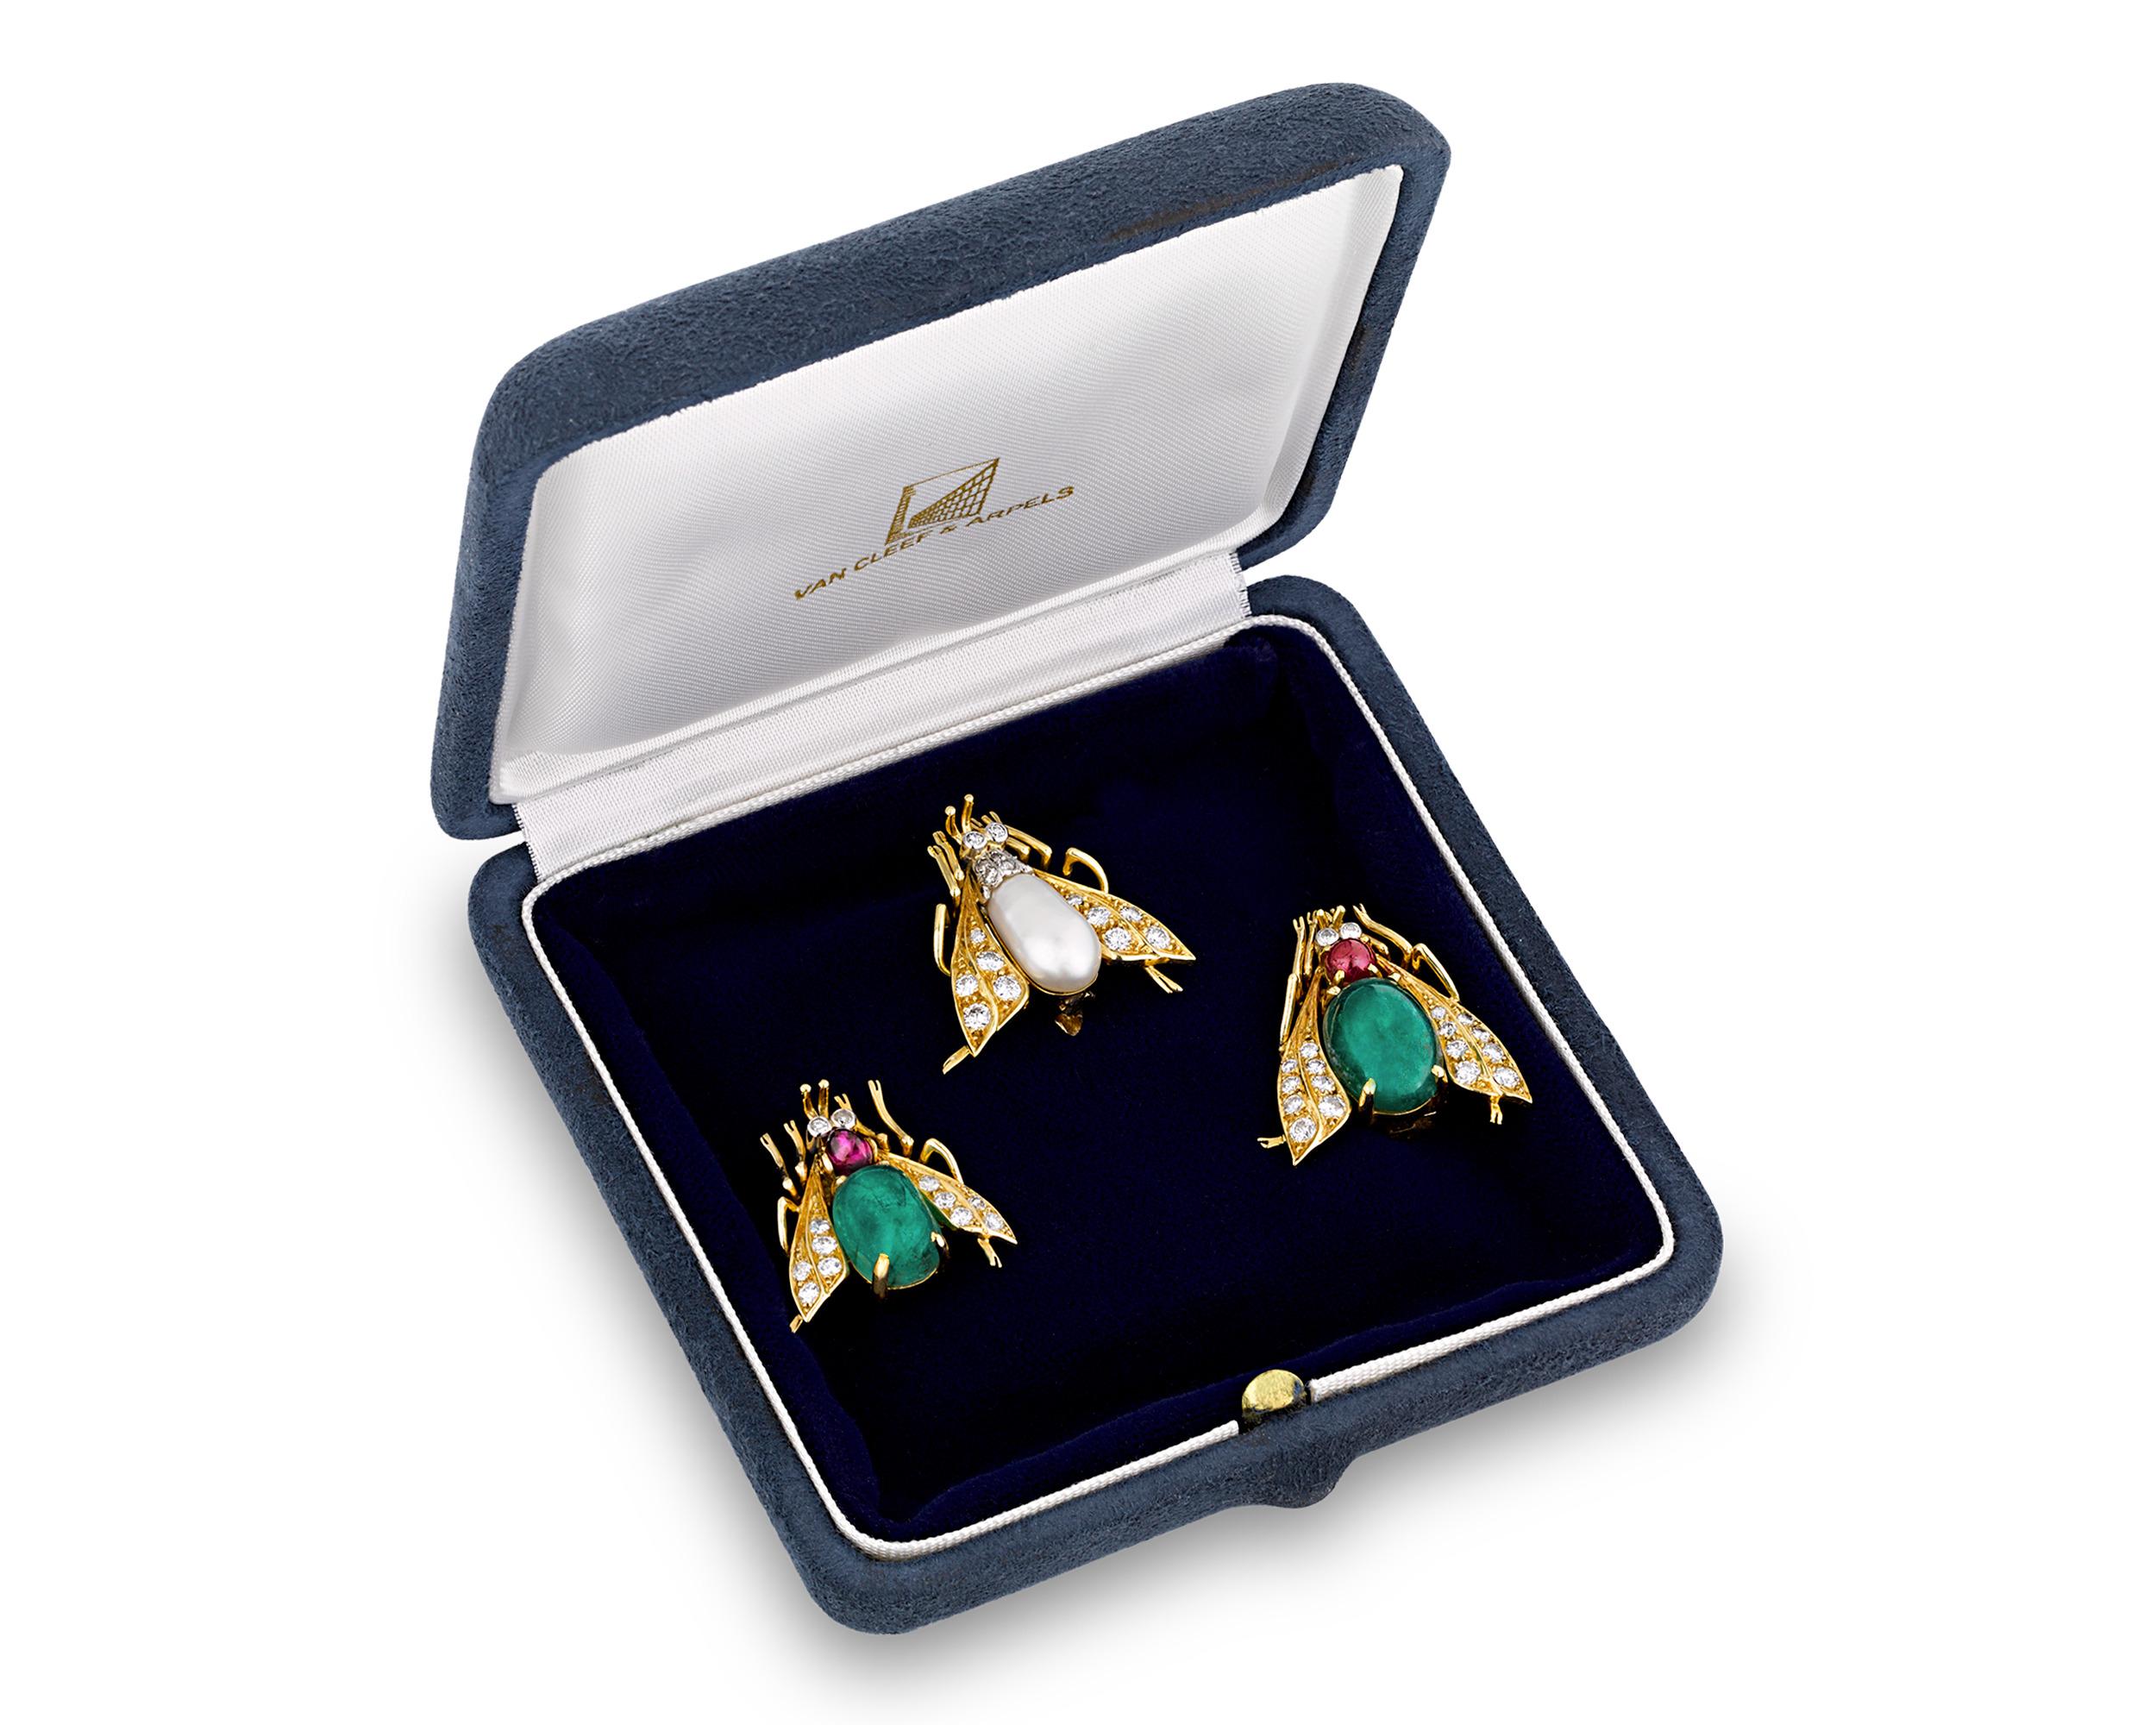 Exuding timeless charm, this trio of pins from French jeweler Van Cleef & Arpels takes the form of whimsical bees. Encrusted with glittering white diamonds, two pins feature vivid green cabochon emeralds, while the third is highlighted by a natural